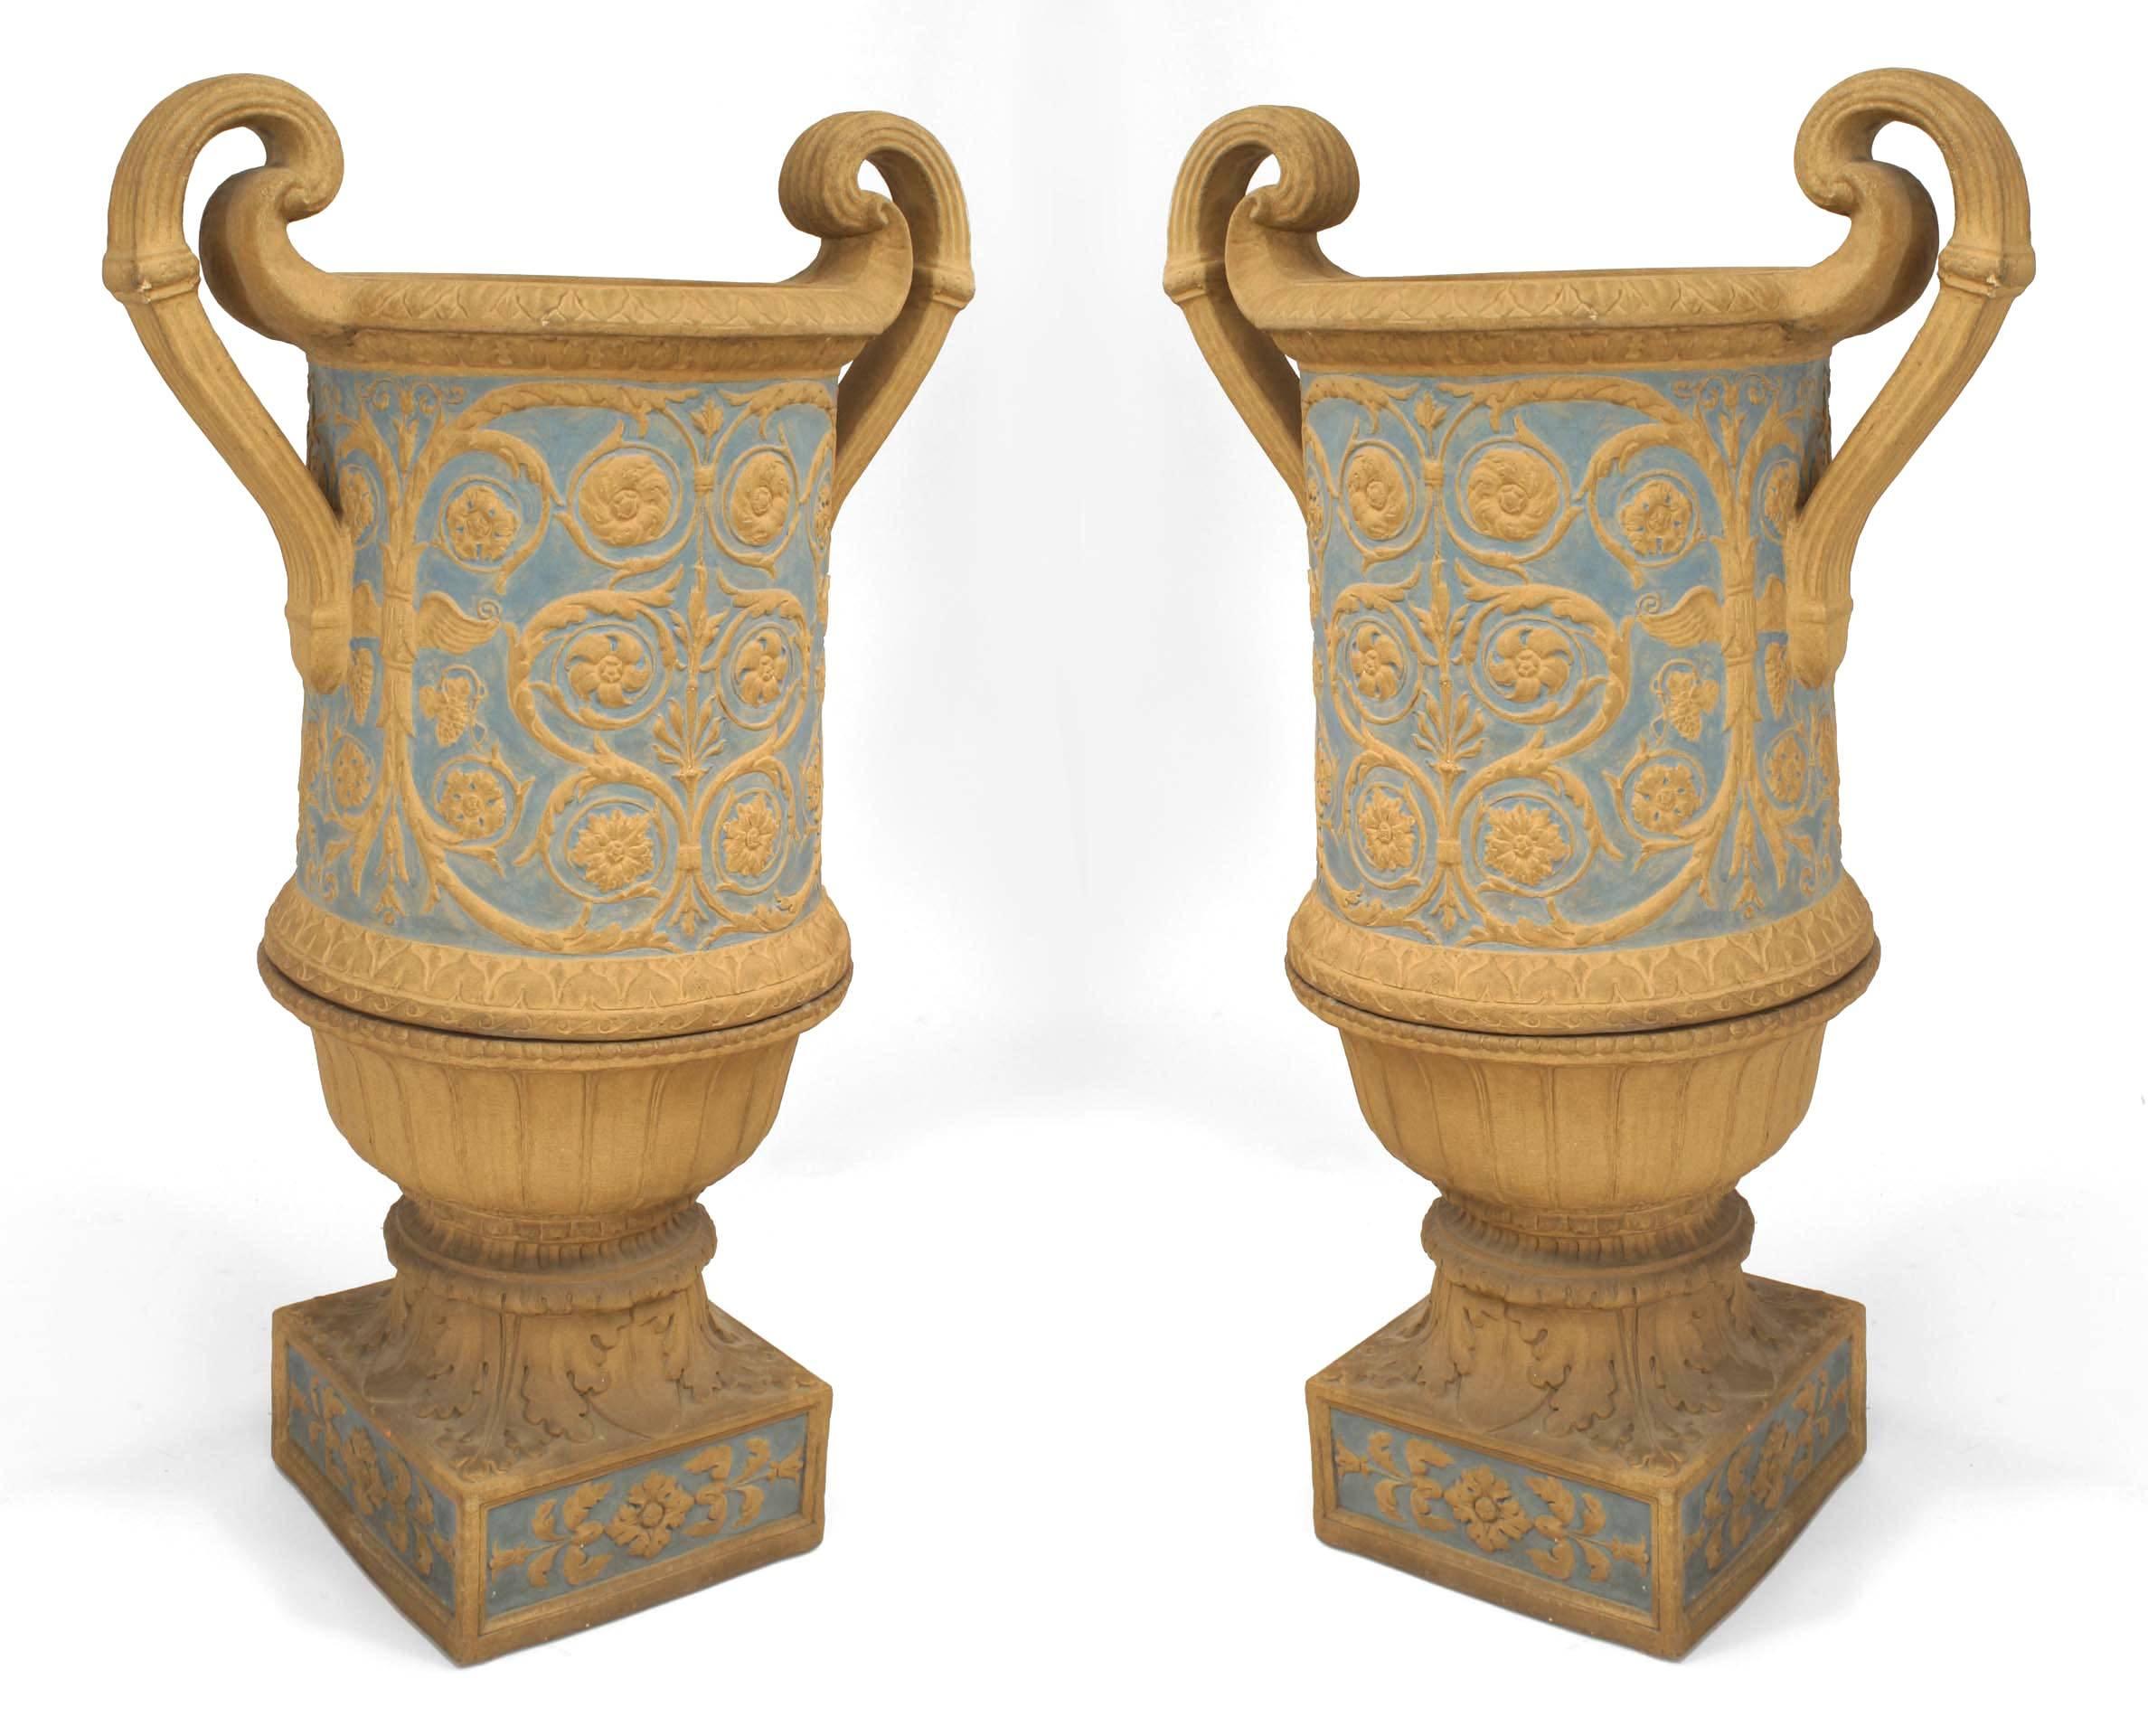 Pair of Neoclassical English Adam style (19th Cent) coade stone urns resting upon square bases with a blue-painted floral and scroll designs and fluted side handles.
